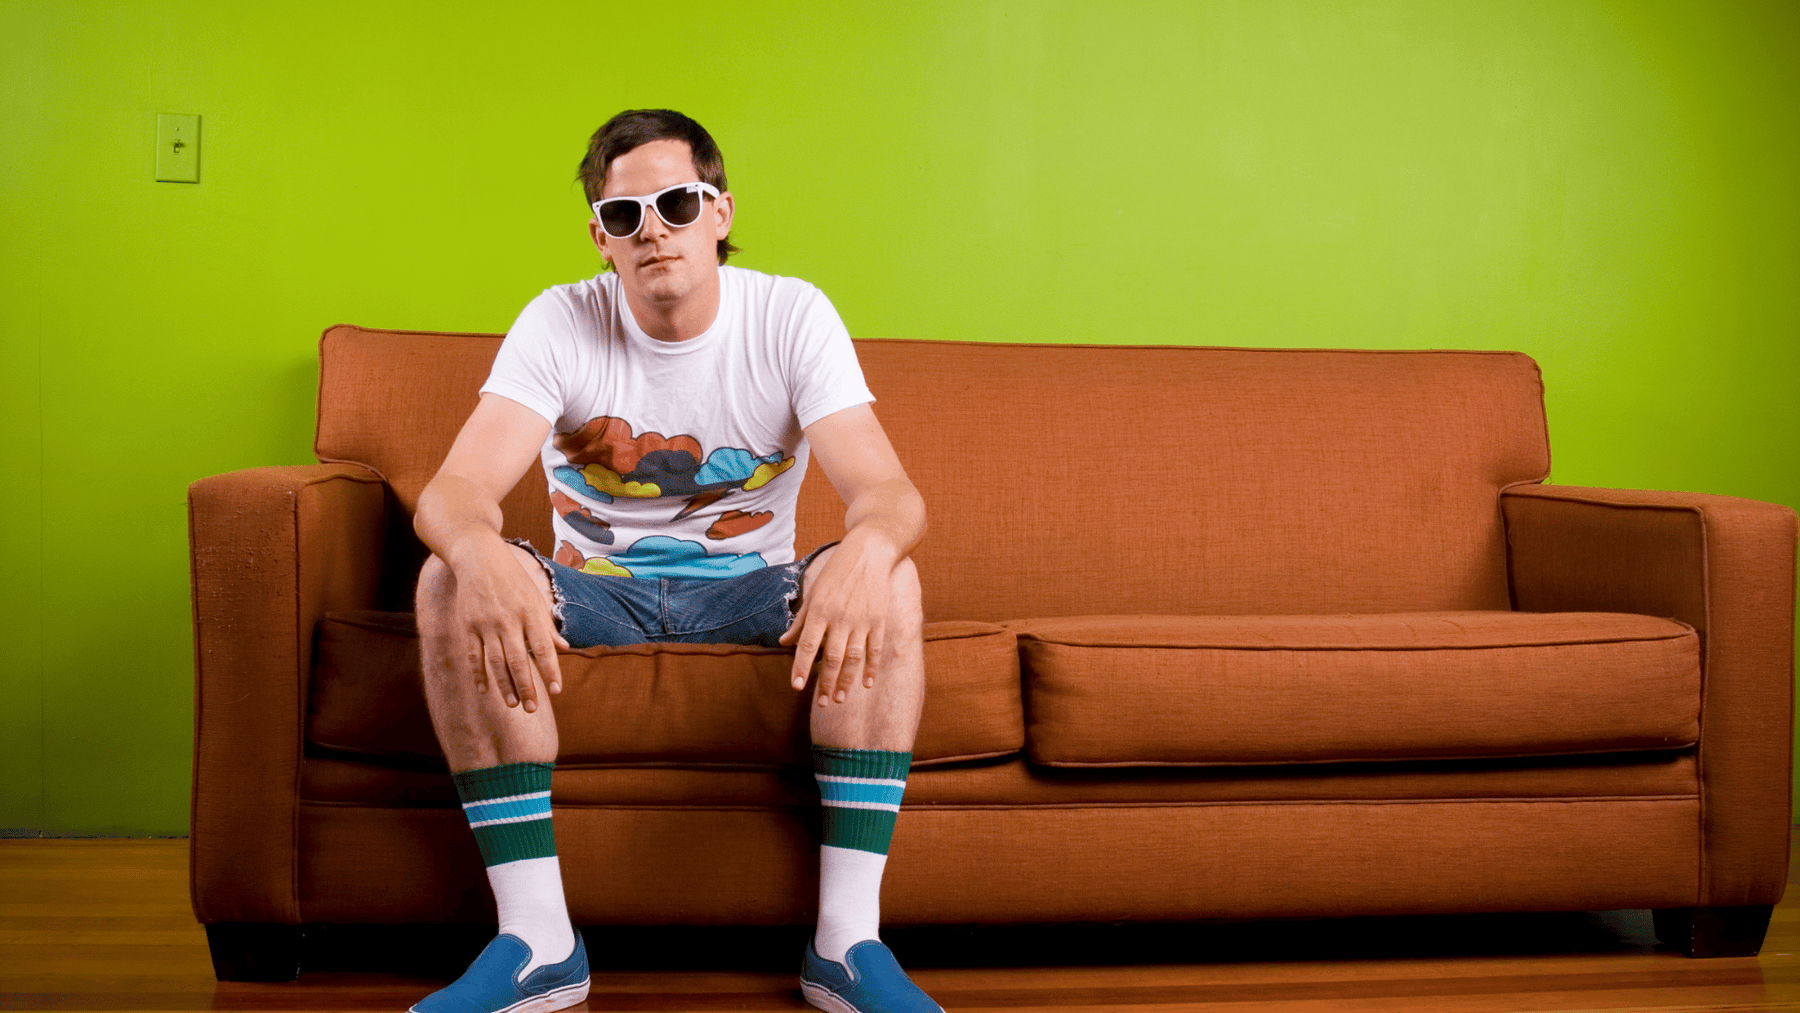 A Modern Man's Guide to Styling Socks with Shorts